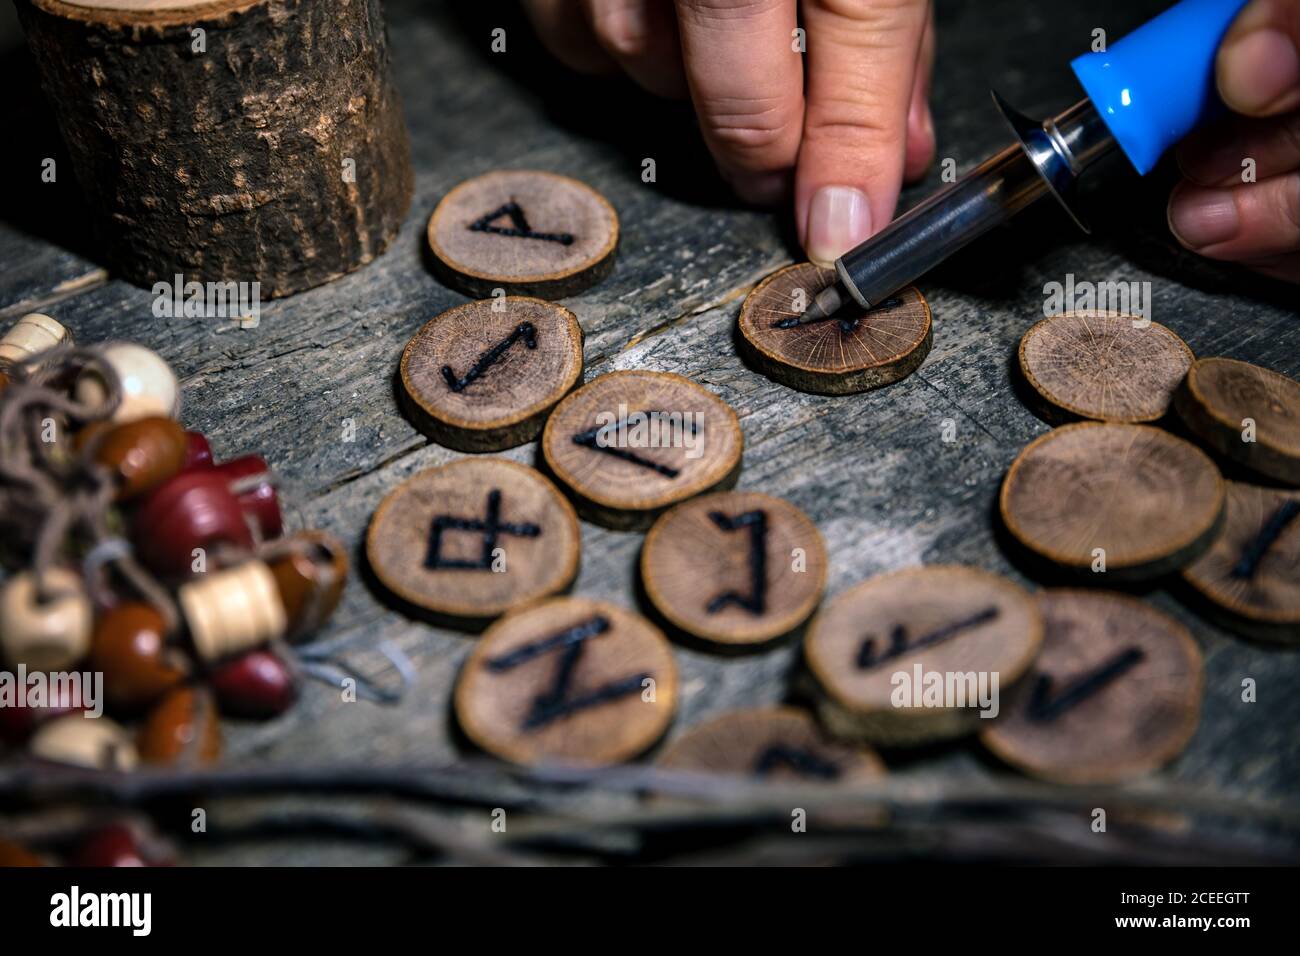 man writing wooden runes with an pyrography or pokerwork, esoteric background Stock Photo